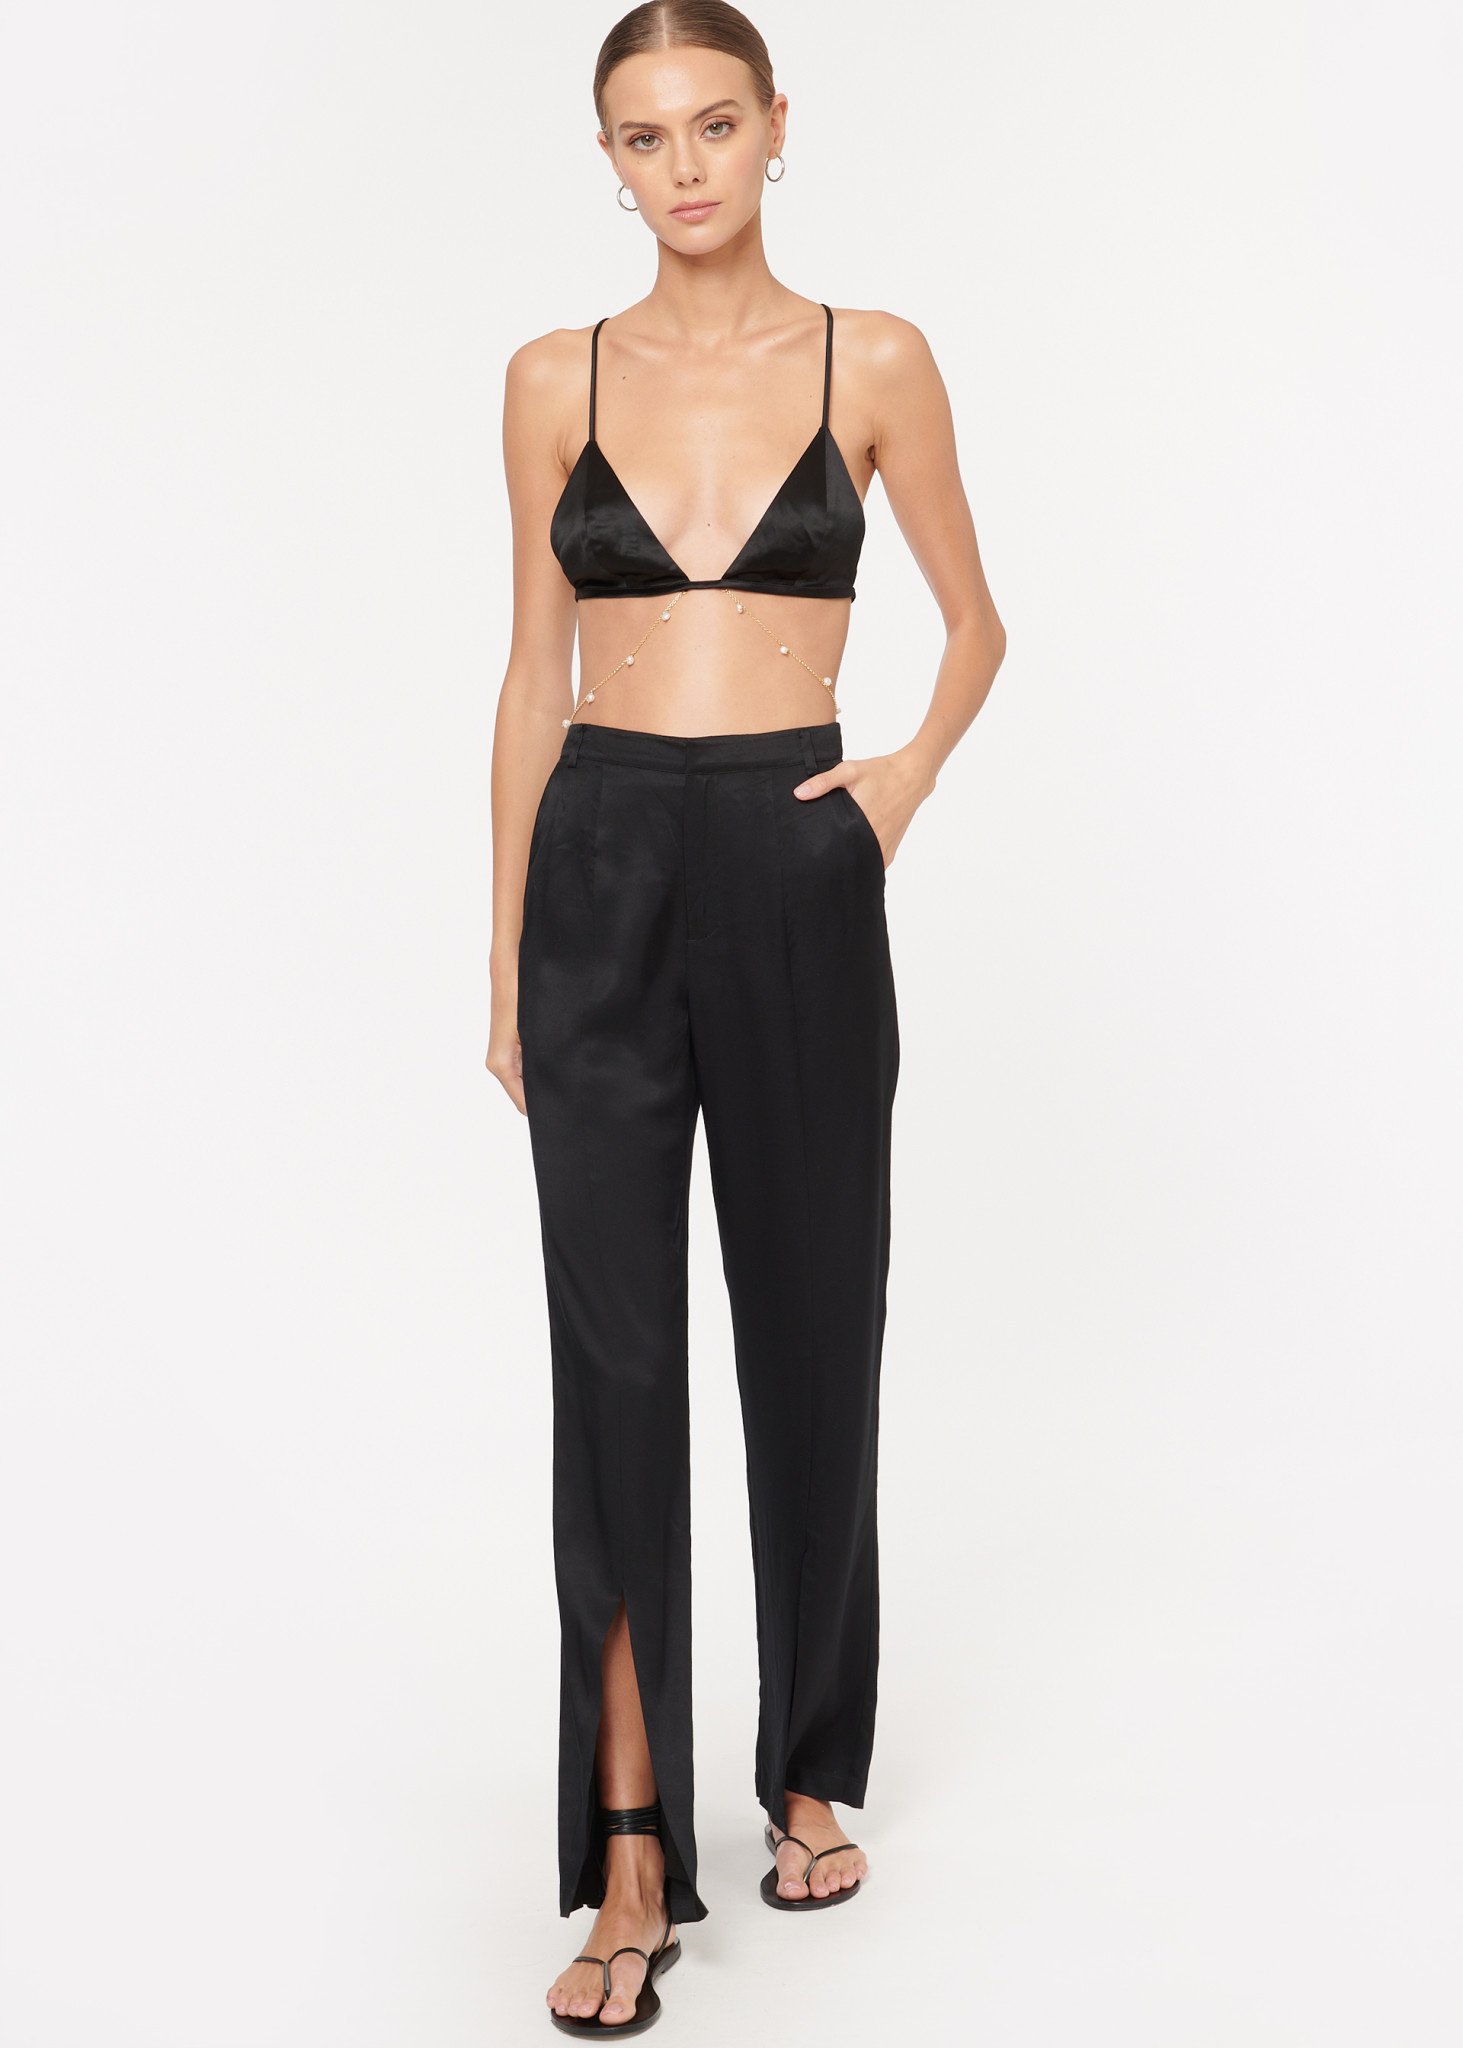 CAMI NYC Jill Pant in Black: Classic and Comfortable Pants - I Am More  Scarsdale